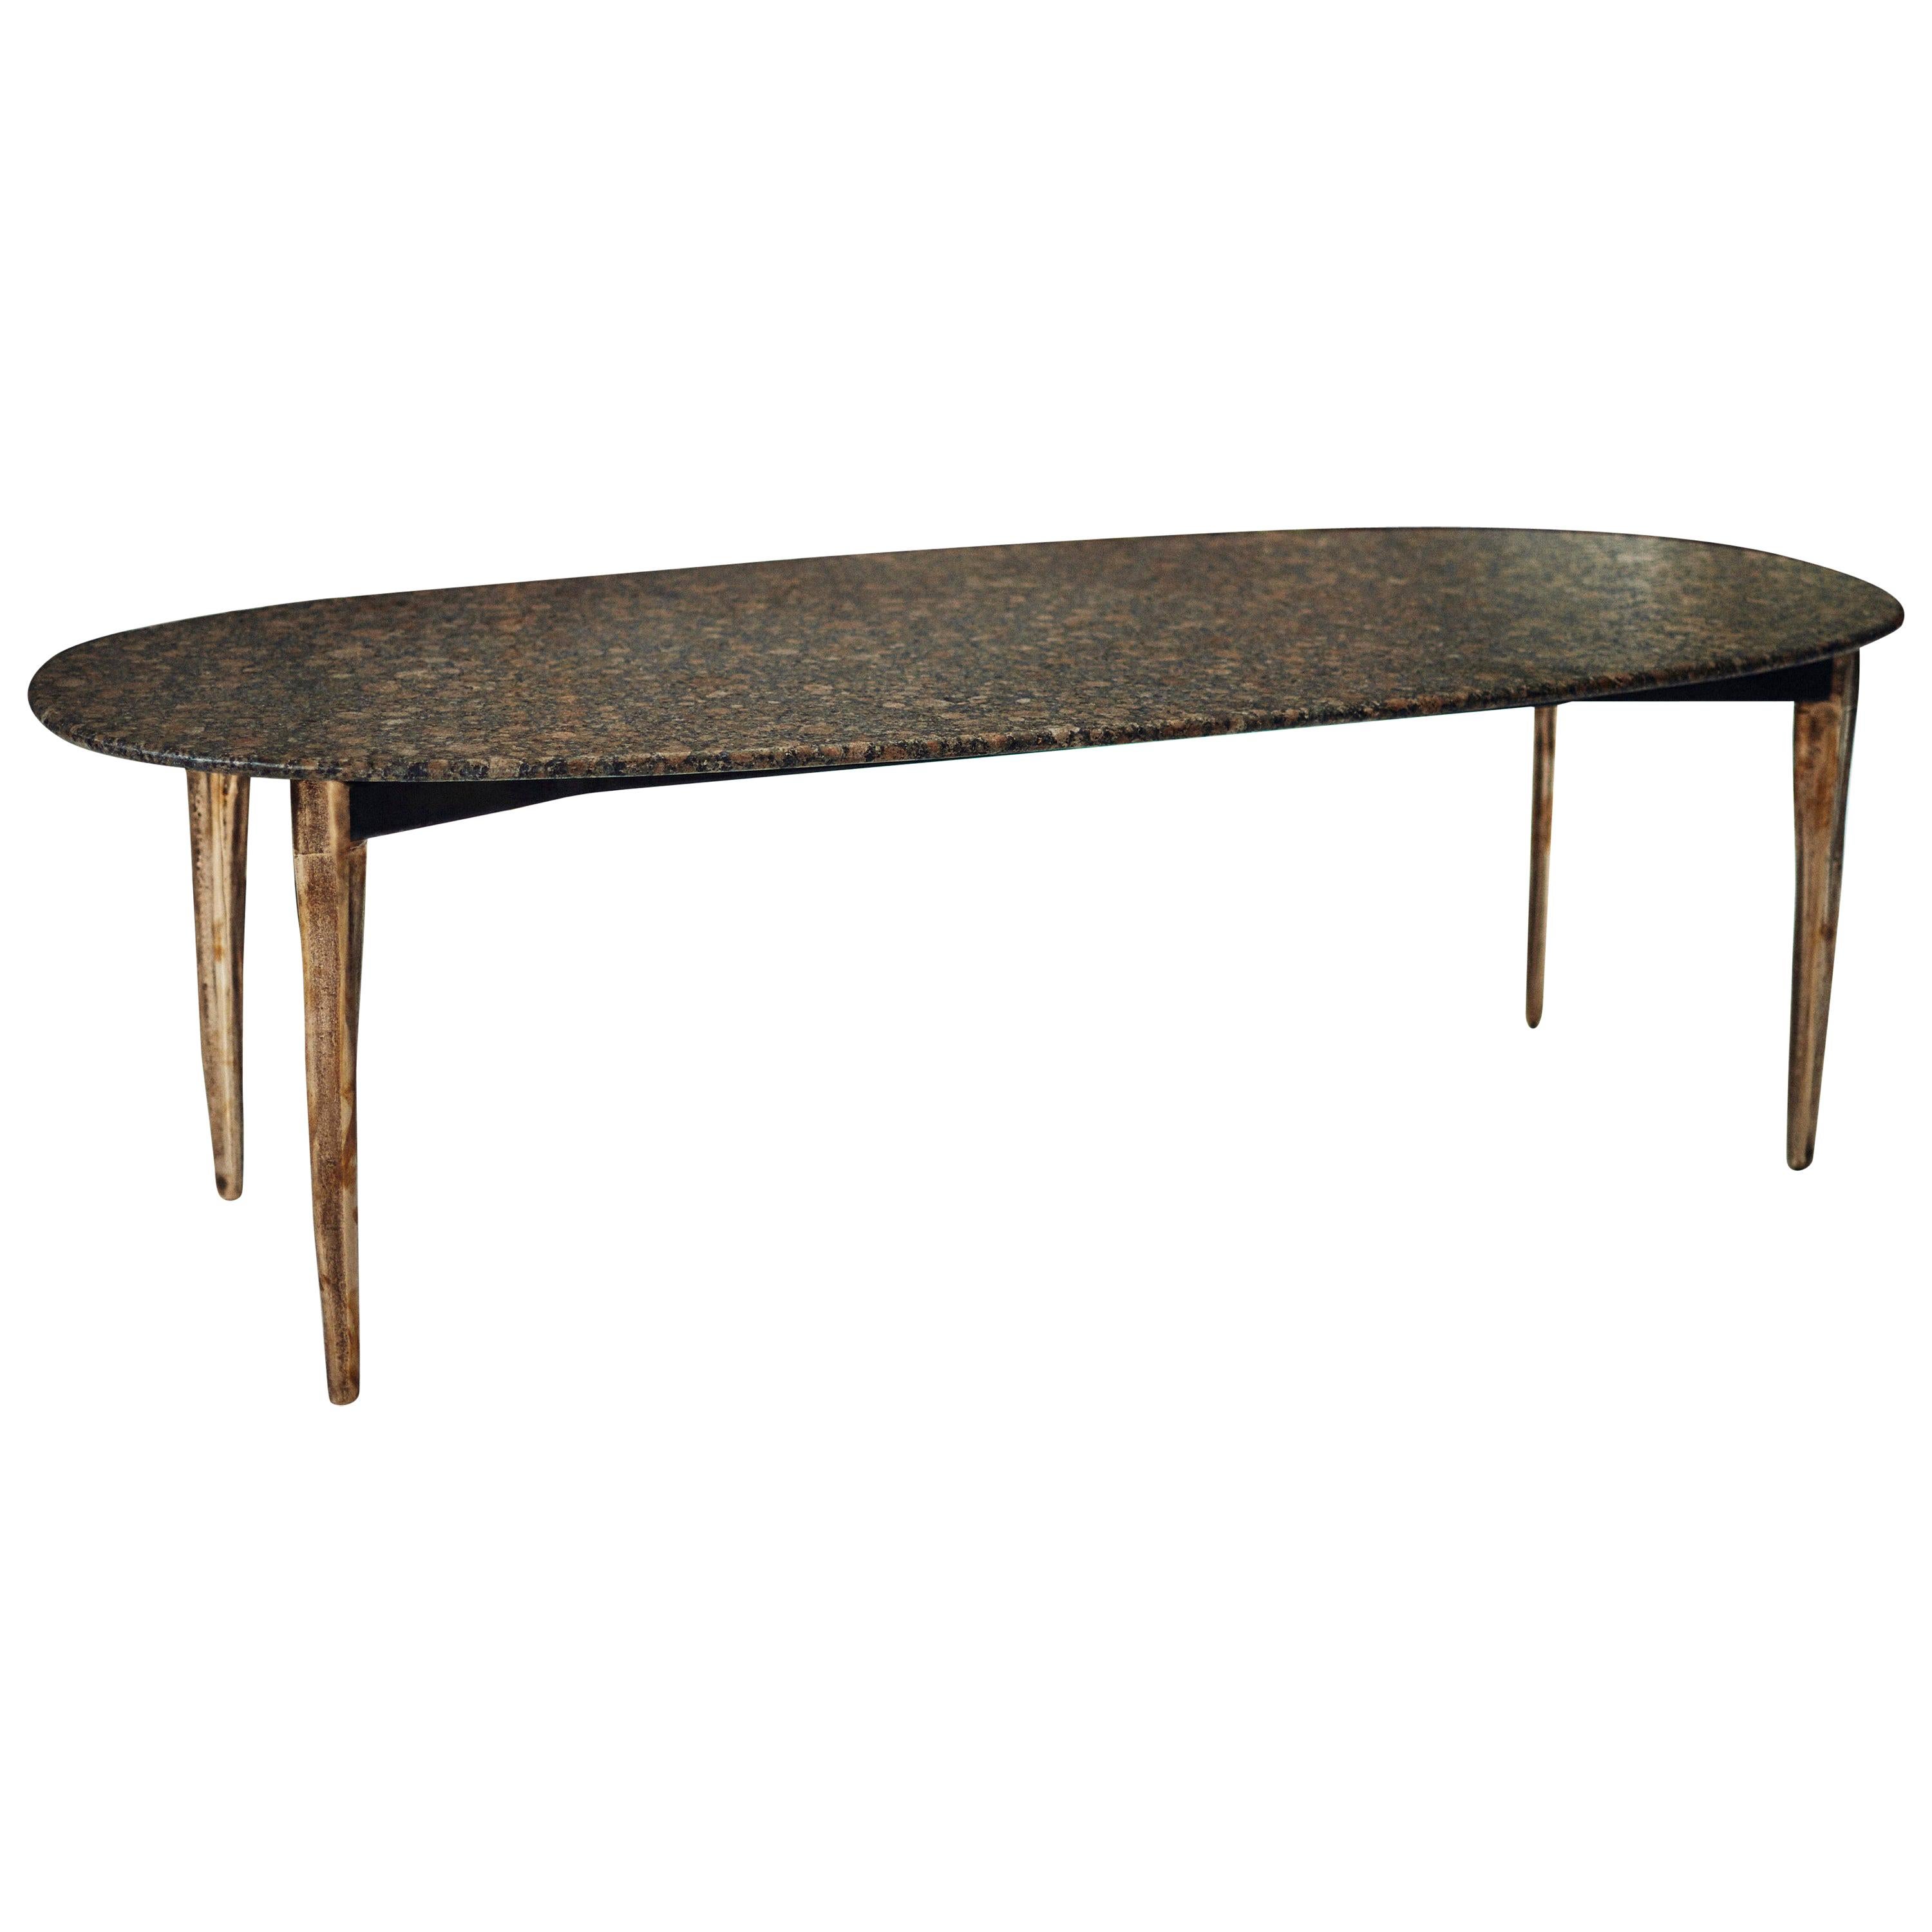 Barbera 'OSSO' Oval Dining Table, Modern Solid Bronze Base with Stone Top